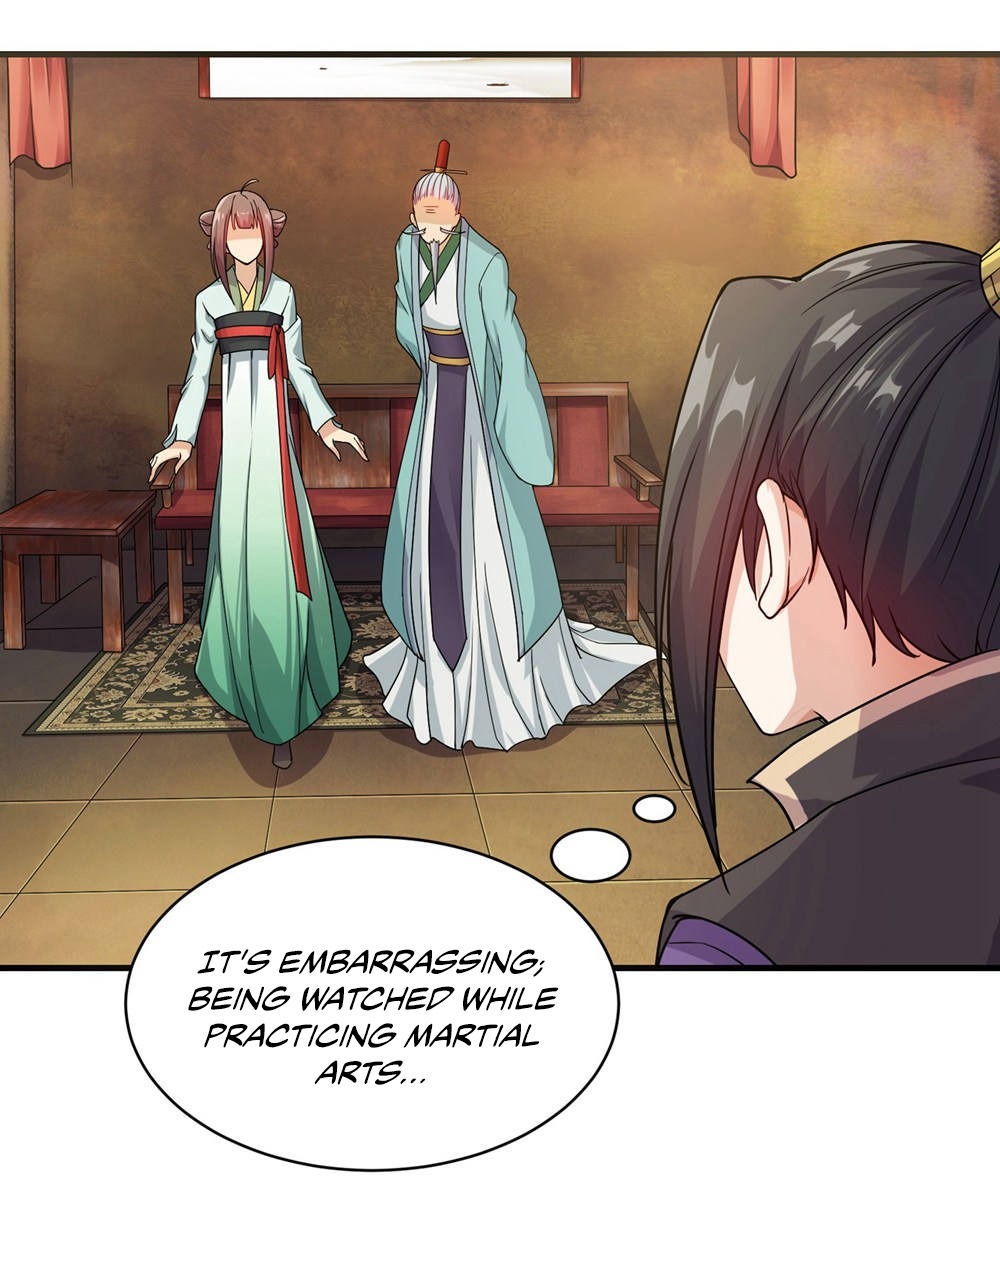 Matchless Emperor ch.6